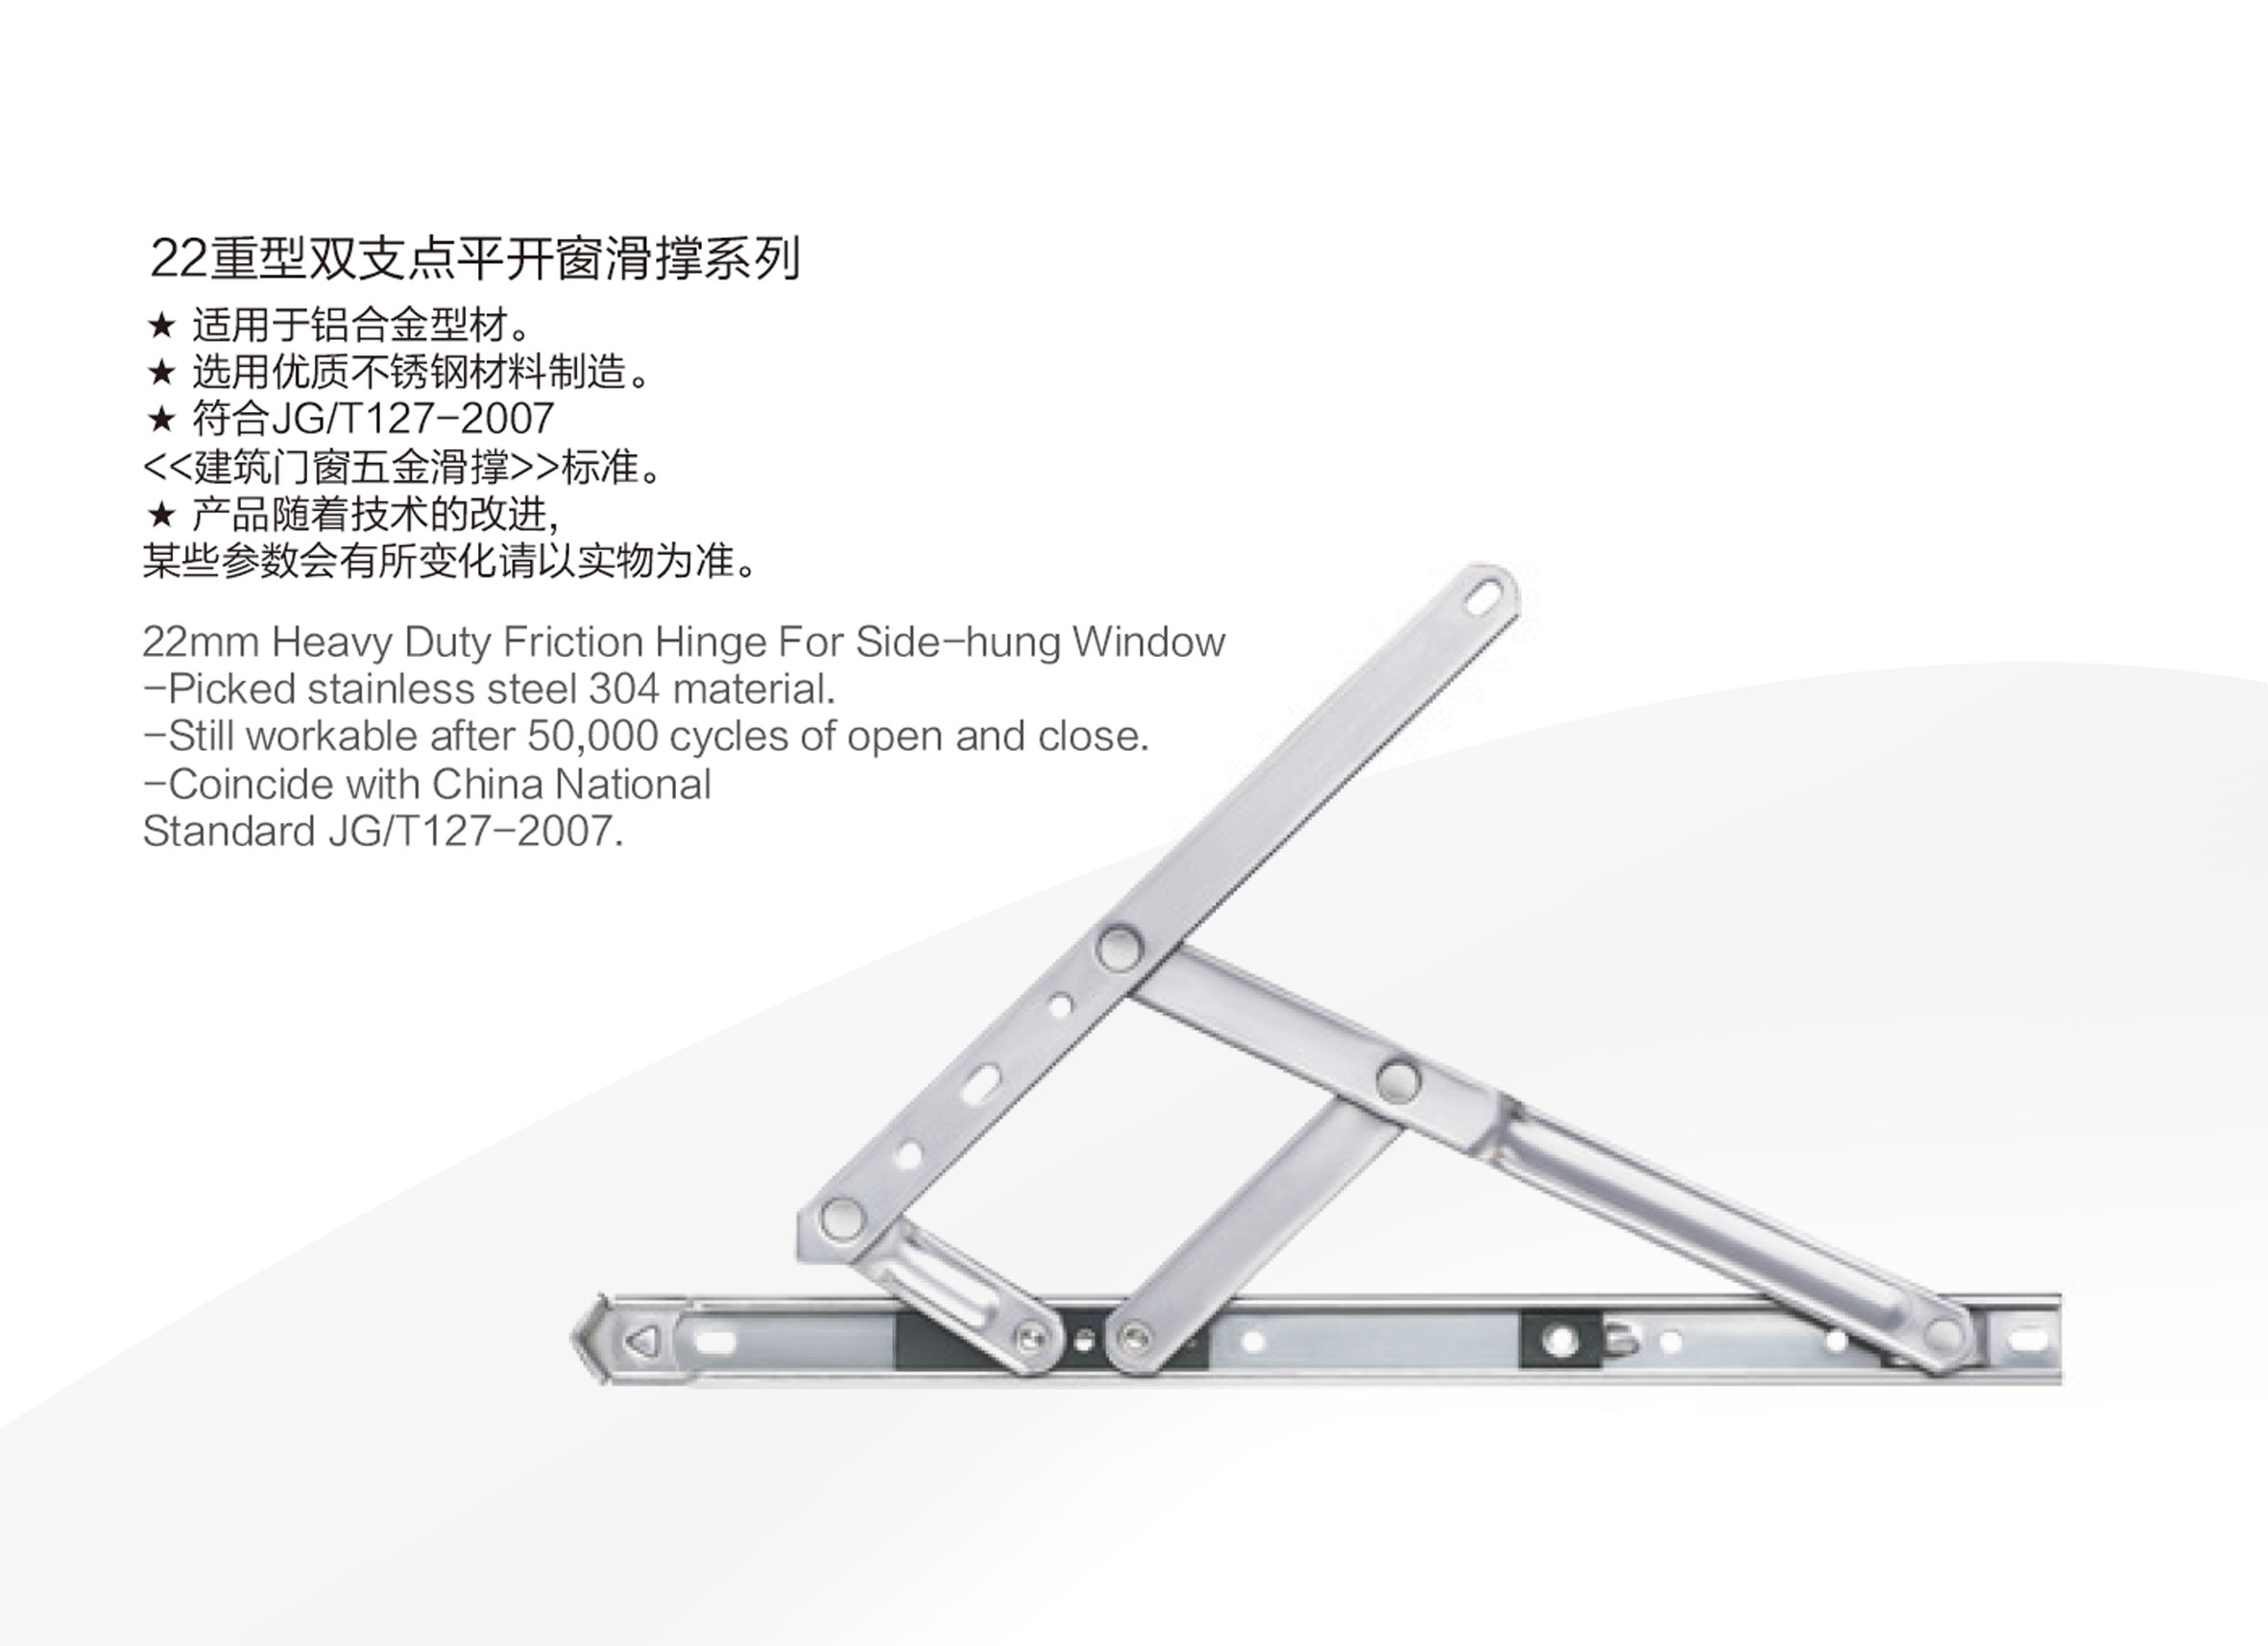 22mm Heavy Duty Friction Hinge For Side-hung Window